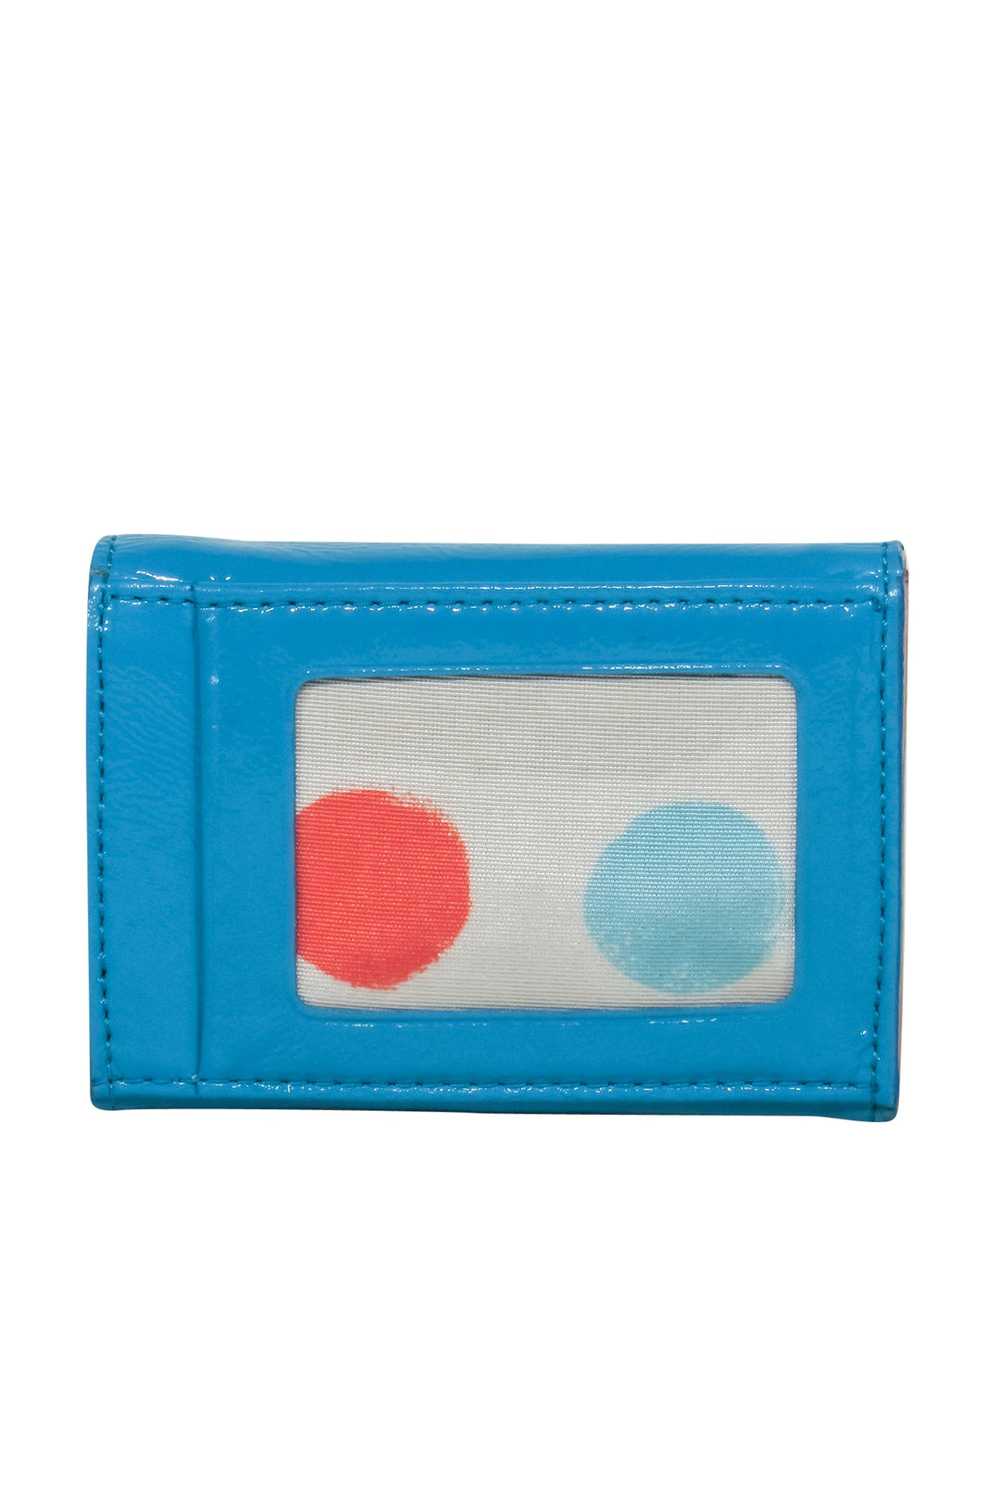 Kate Spade - Mini Teal Patent Leather Wallet - image 3